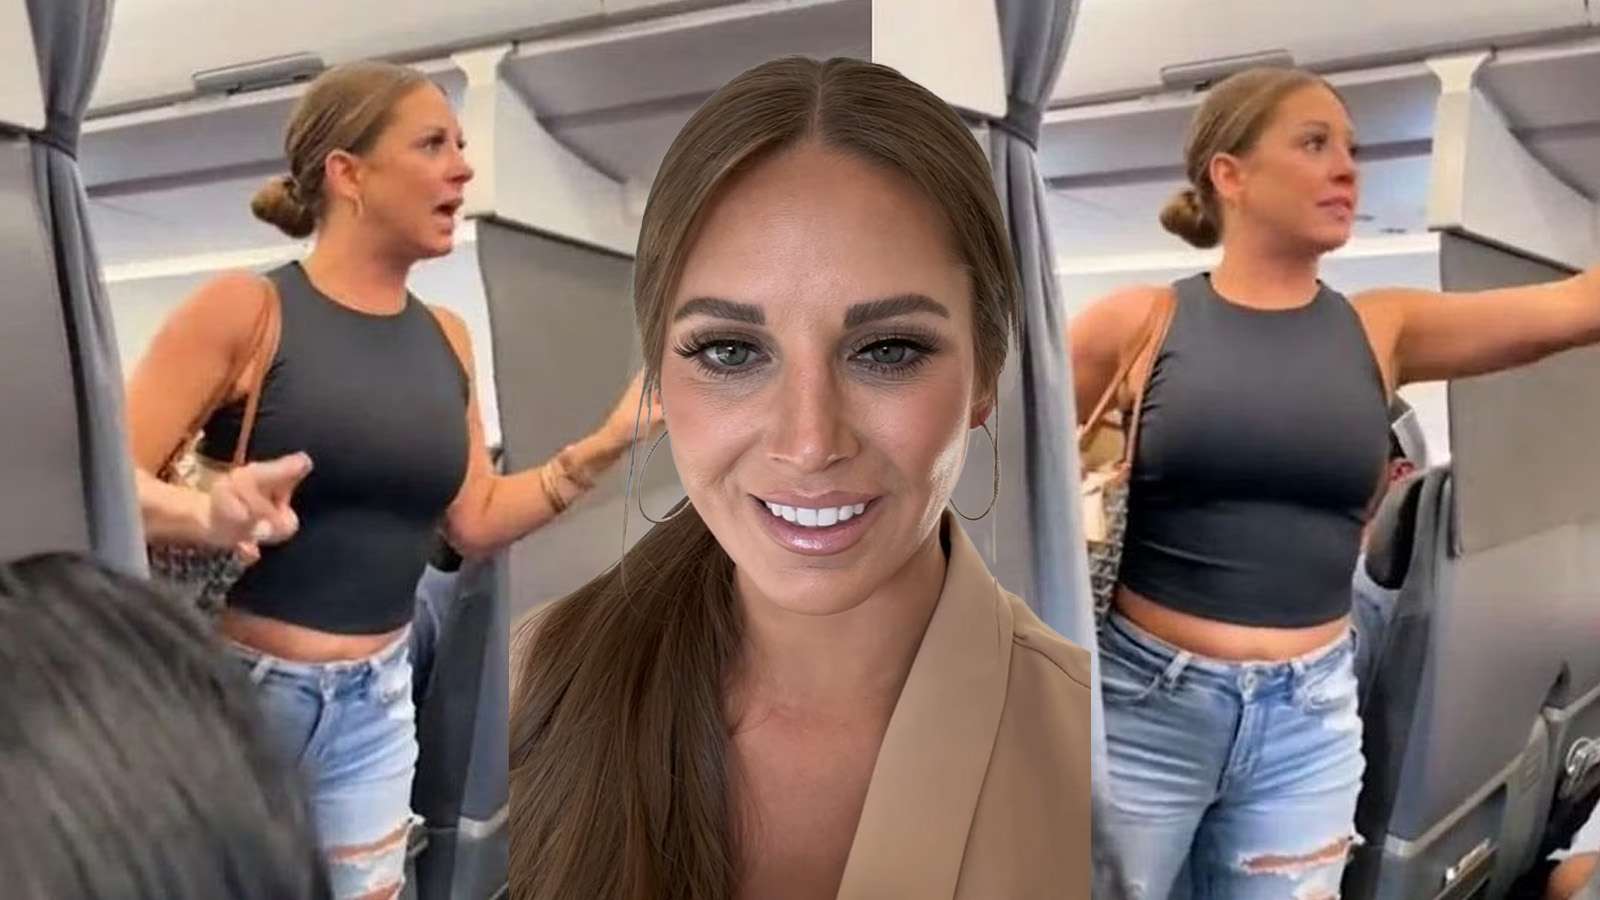 Woman from viral not real plane video admits freakout was her very worst moment